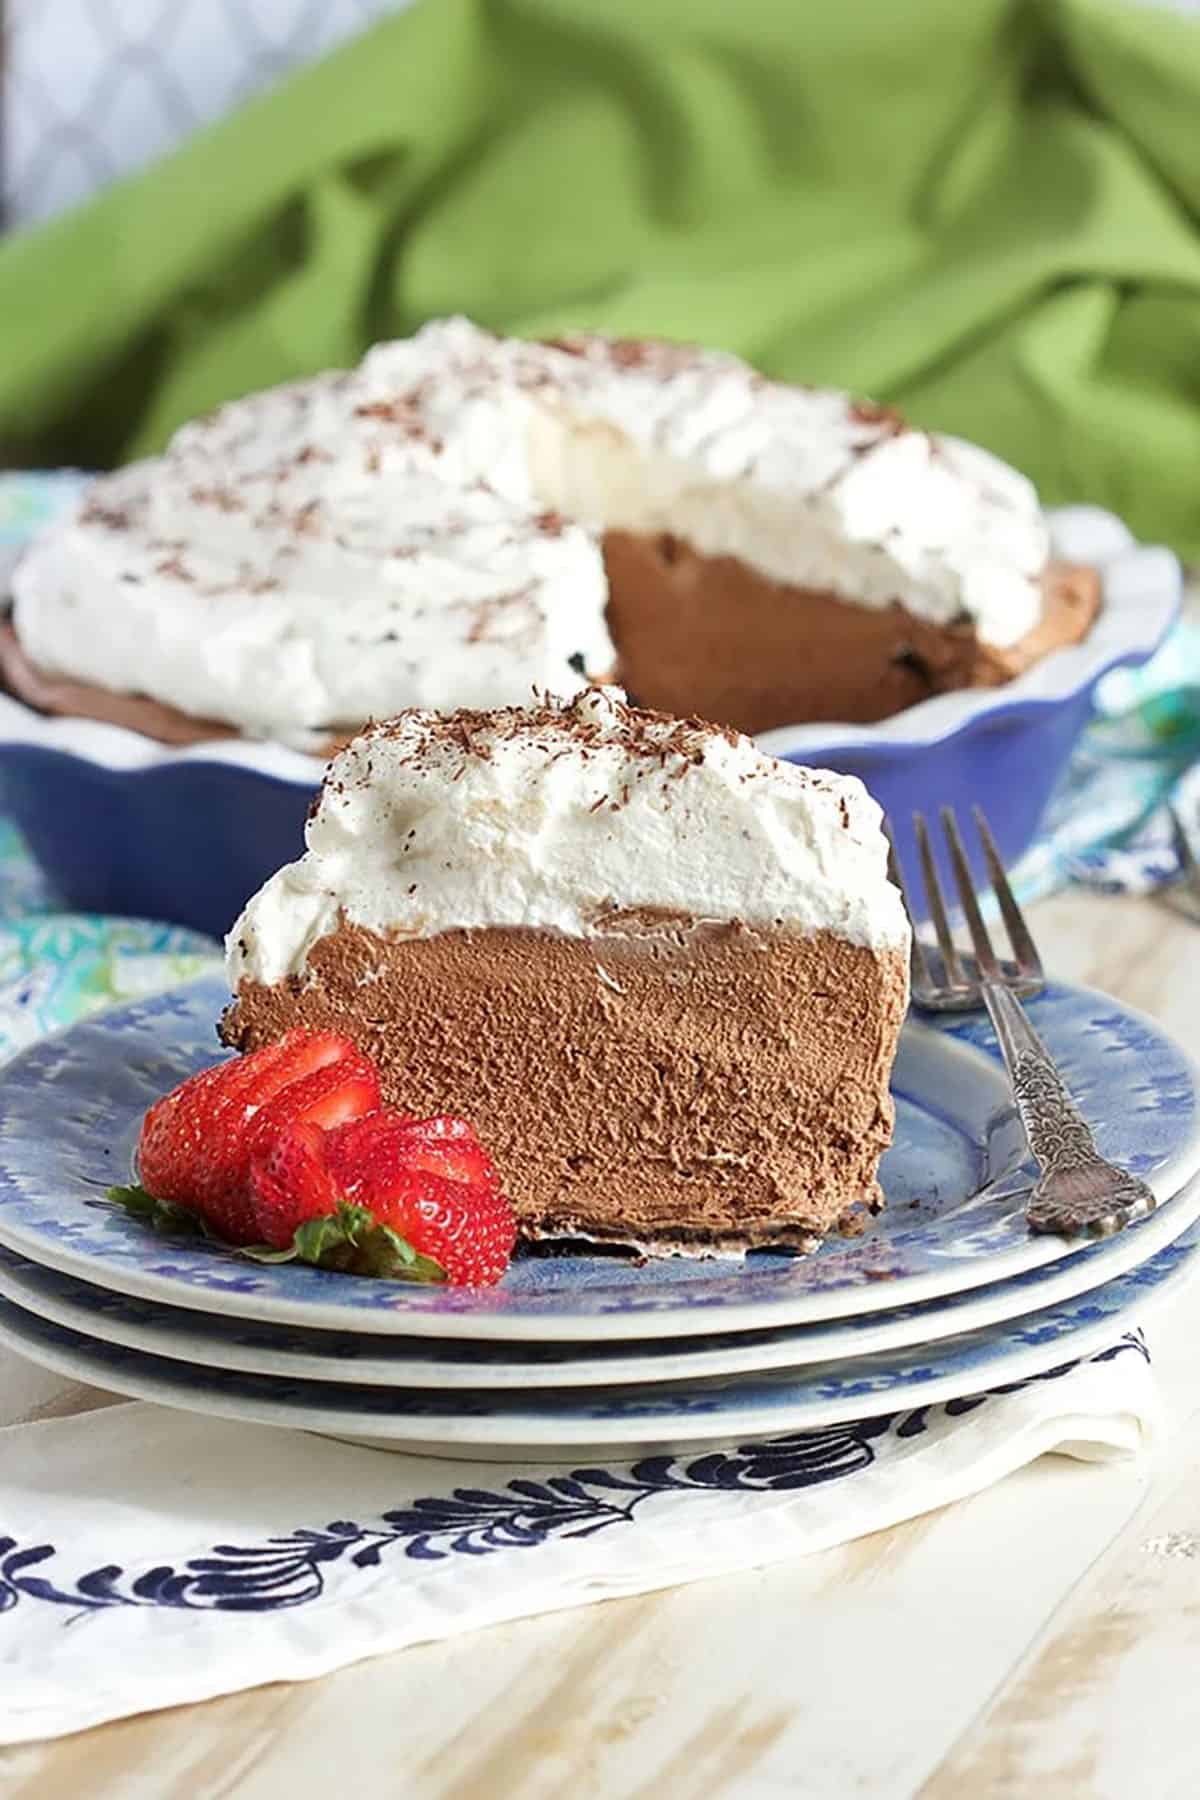 Chocolate Mousse Pie slice on a blue plate with a whole pie in the background.